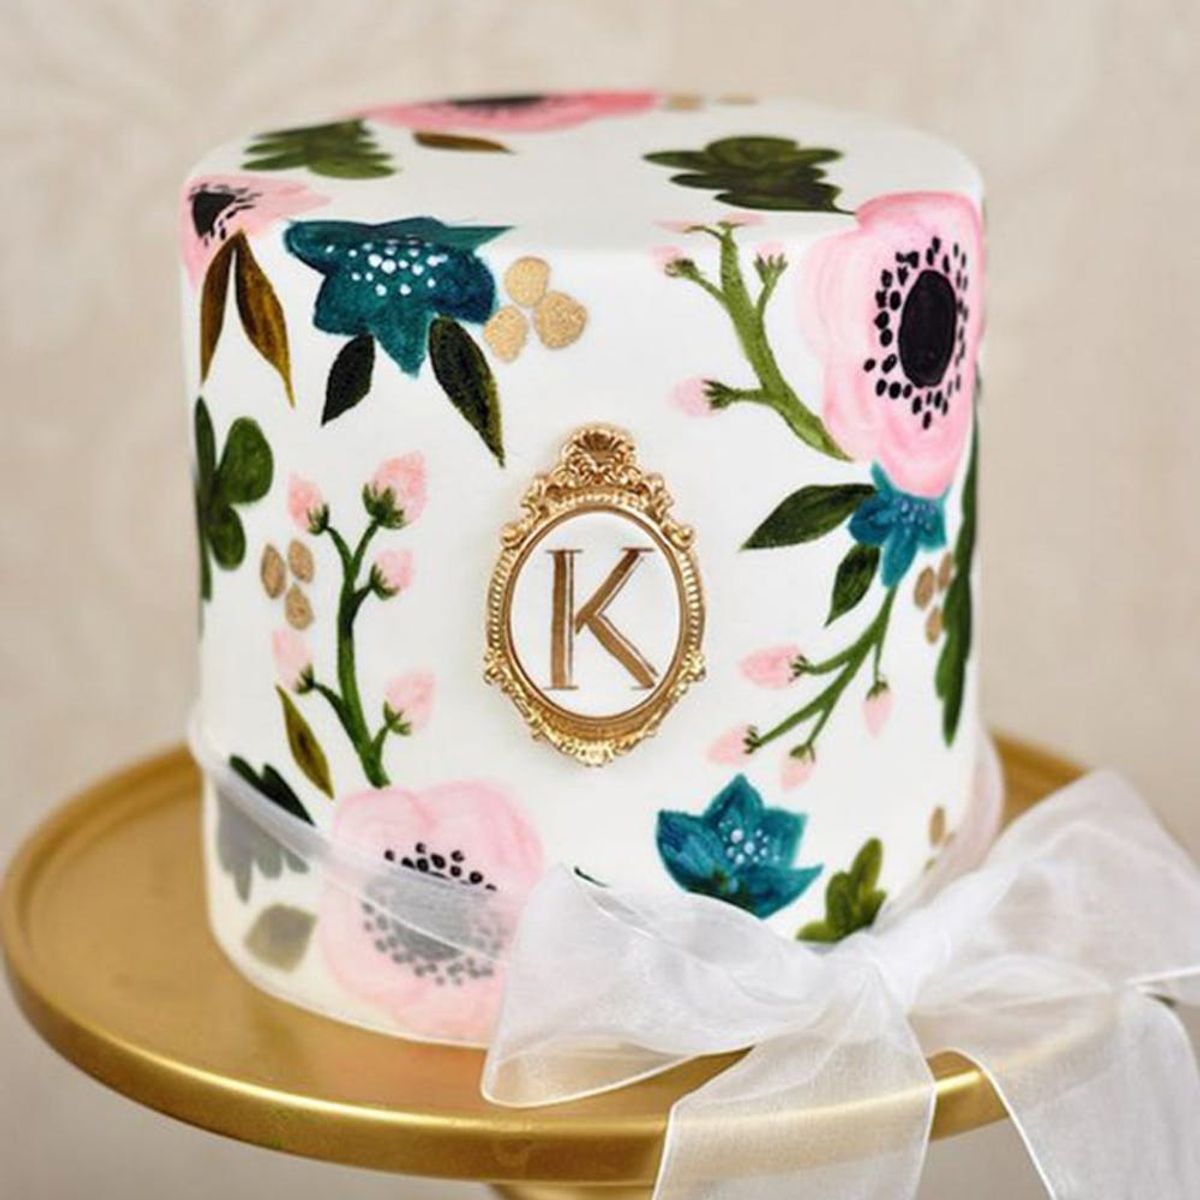 20 Hand-Painted Wedding Cakes That Will Make You Do a Double Take